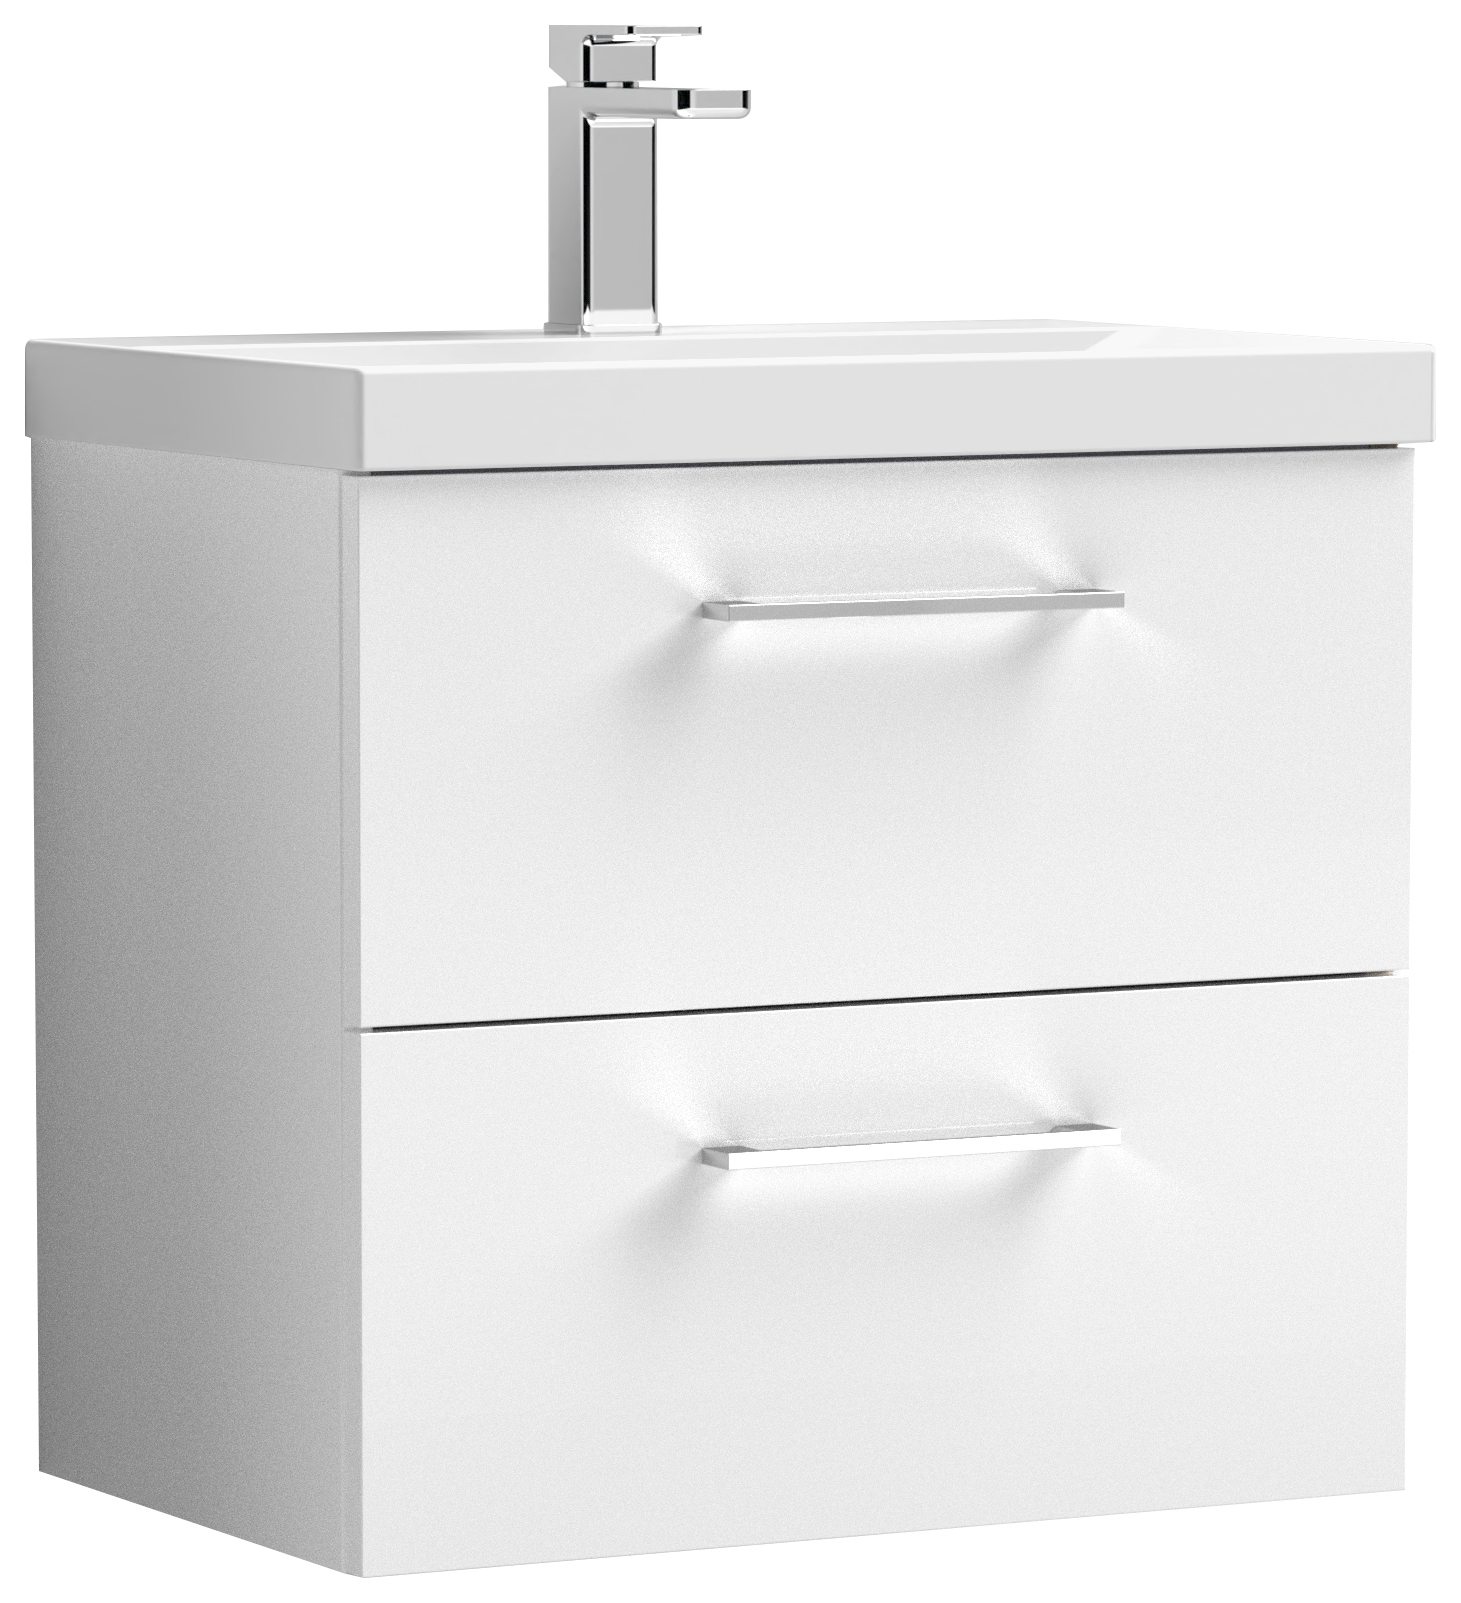 Nuie Arno Gloss White Wall Hung 2 Drawer Vanity Unit & Basin - 579 x 610mm